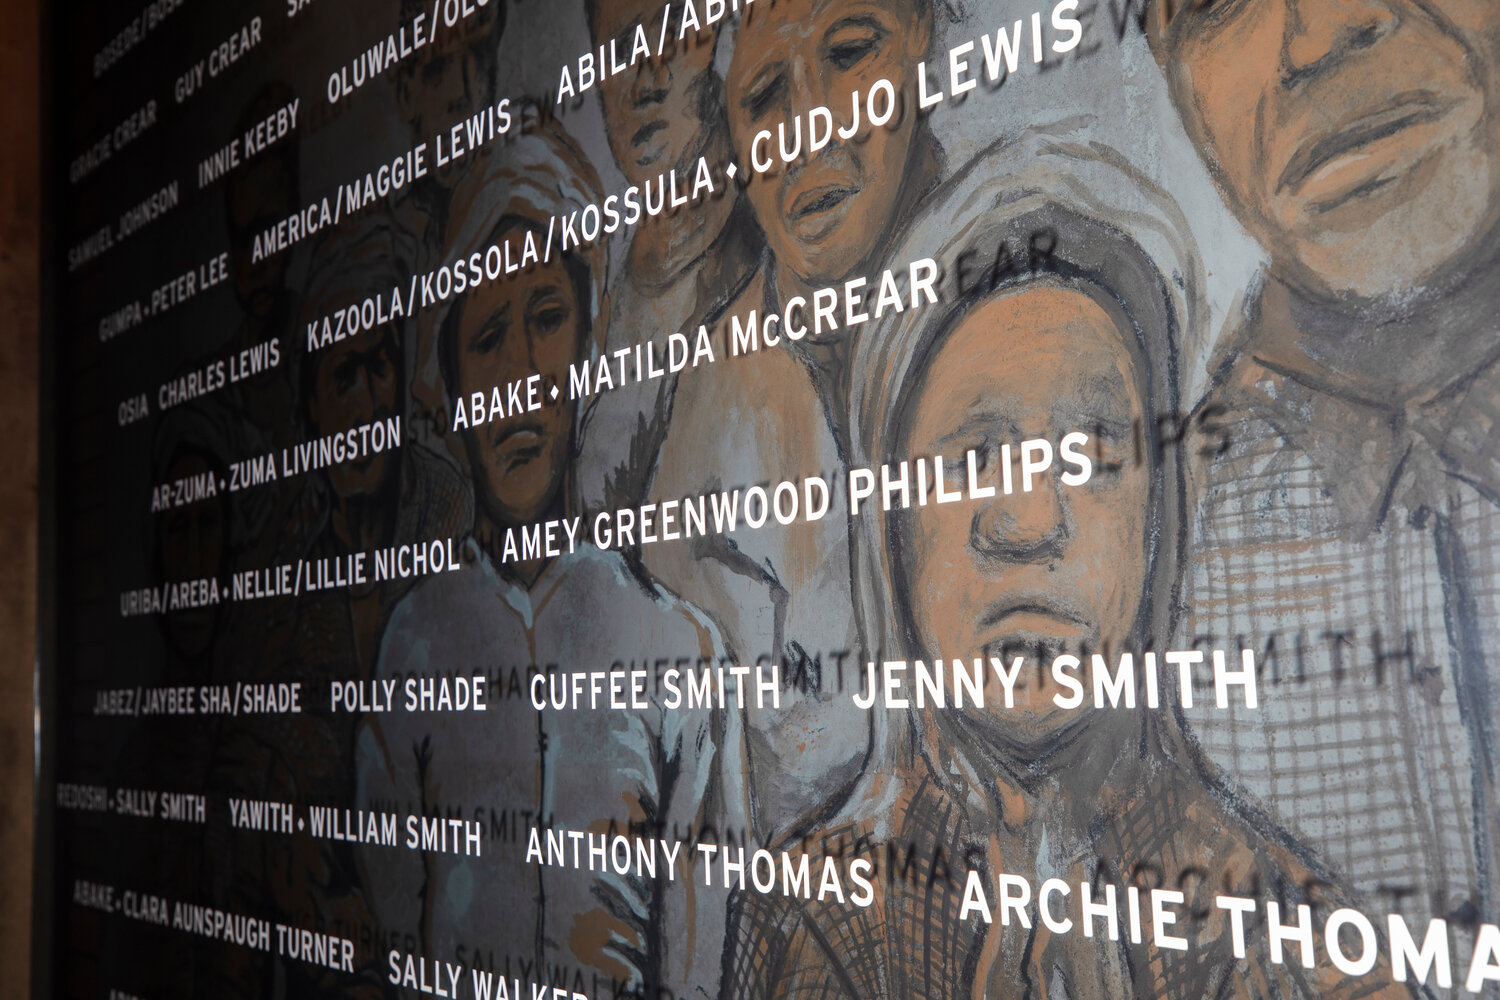 Amey Greenwood Phillips is one of the names on a wall at the Clotilda Exhibit in the Africatown Heritage House with ties to Baldwin County.